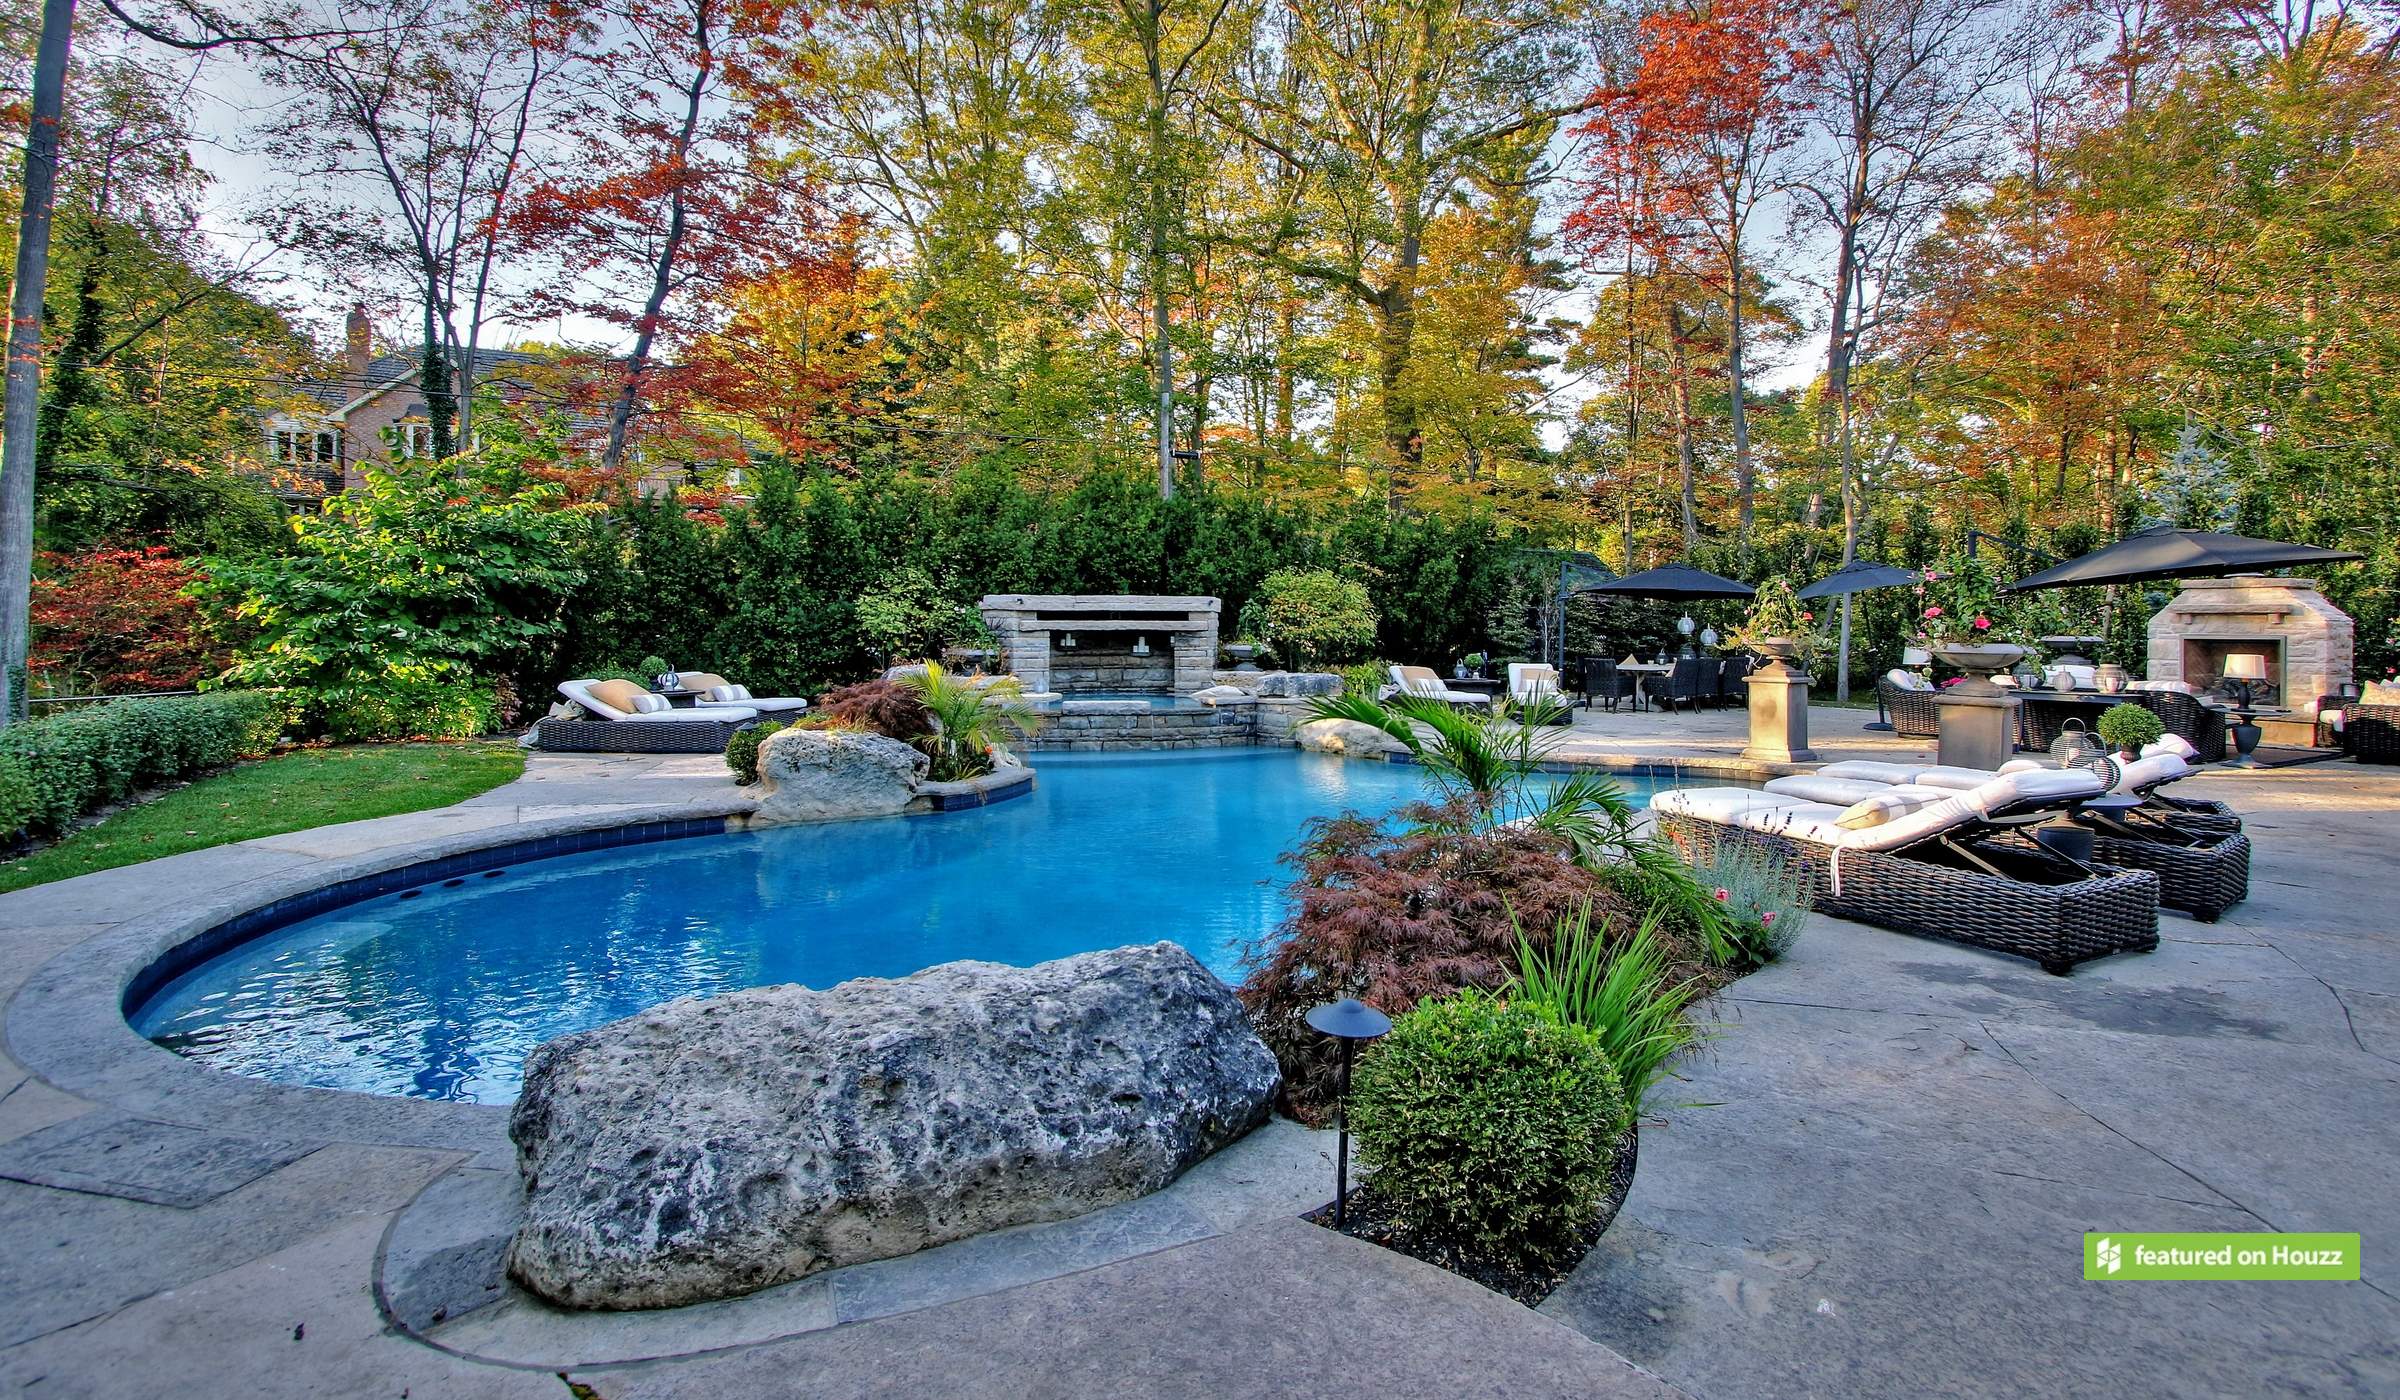 Lush backyard with a curved swimming pool, outdoor furniture, stone fireplace, and colorful autumn leaves on trees in a tranquil residential setting.